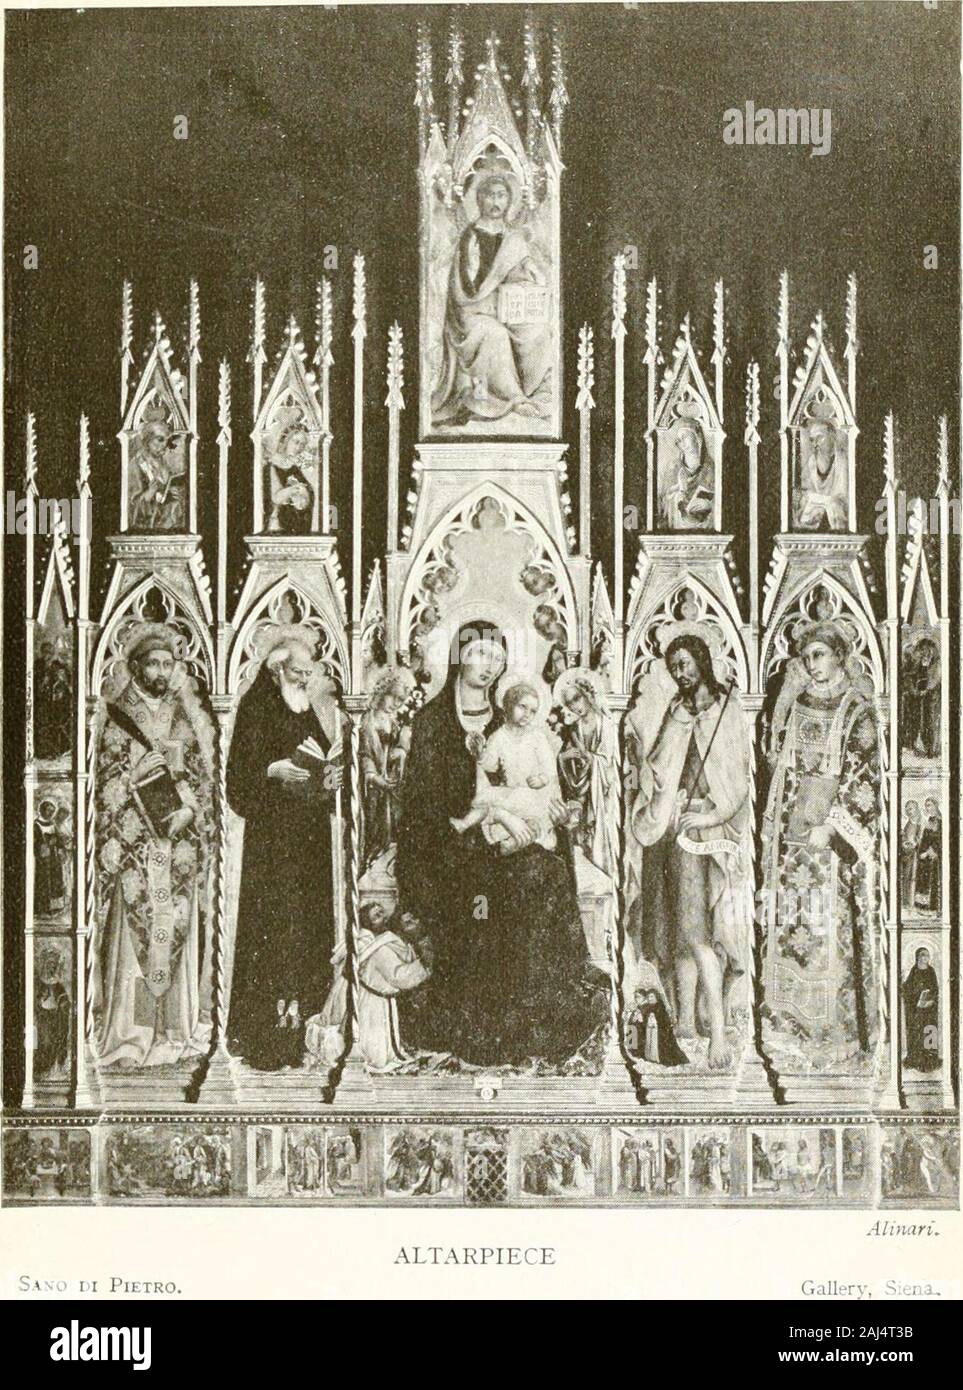 A new history of painting in Italy : from the II to the XVI century . lery of Siena,both of them being predella pictures. MB. PERKINS further ascribes to him alittle Virgin and Child (No. 158) and a Crucifixion in the same Gallery (cf.Rassegna (TArte Senese, an. iv., fasc. 2—3), as well as five panels, Press S, Nos.IV.-VIIL, representing the Nativity of the Virgin, her Presentation, her Marriage,the Visitation, and the Adoration of the Magi, in the Christian Museum of theVatican (Rassegna dArte (Milan), Aug. 1906).] 1 He was companion to Matteo of Siena (Doc. Sen., vol. ii., p. 279), and isdes Stock Photo